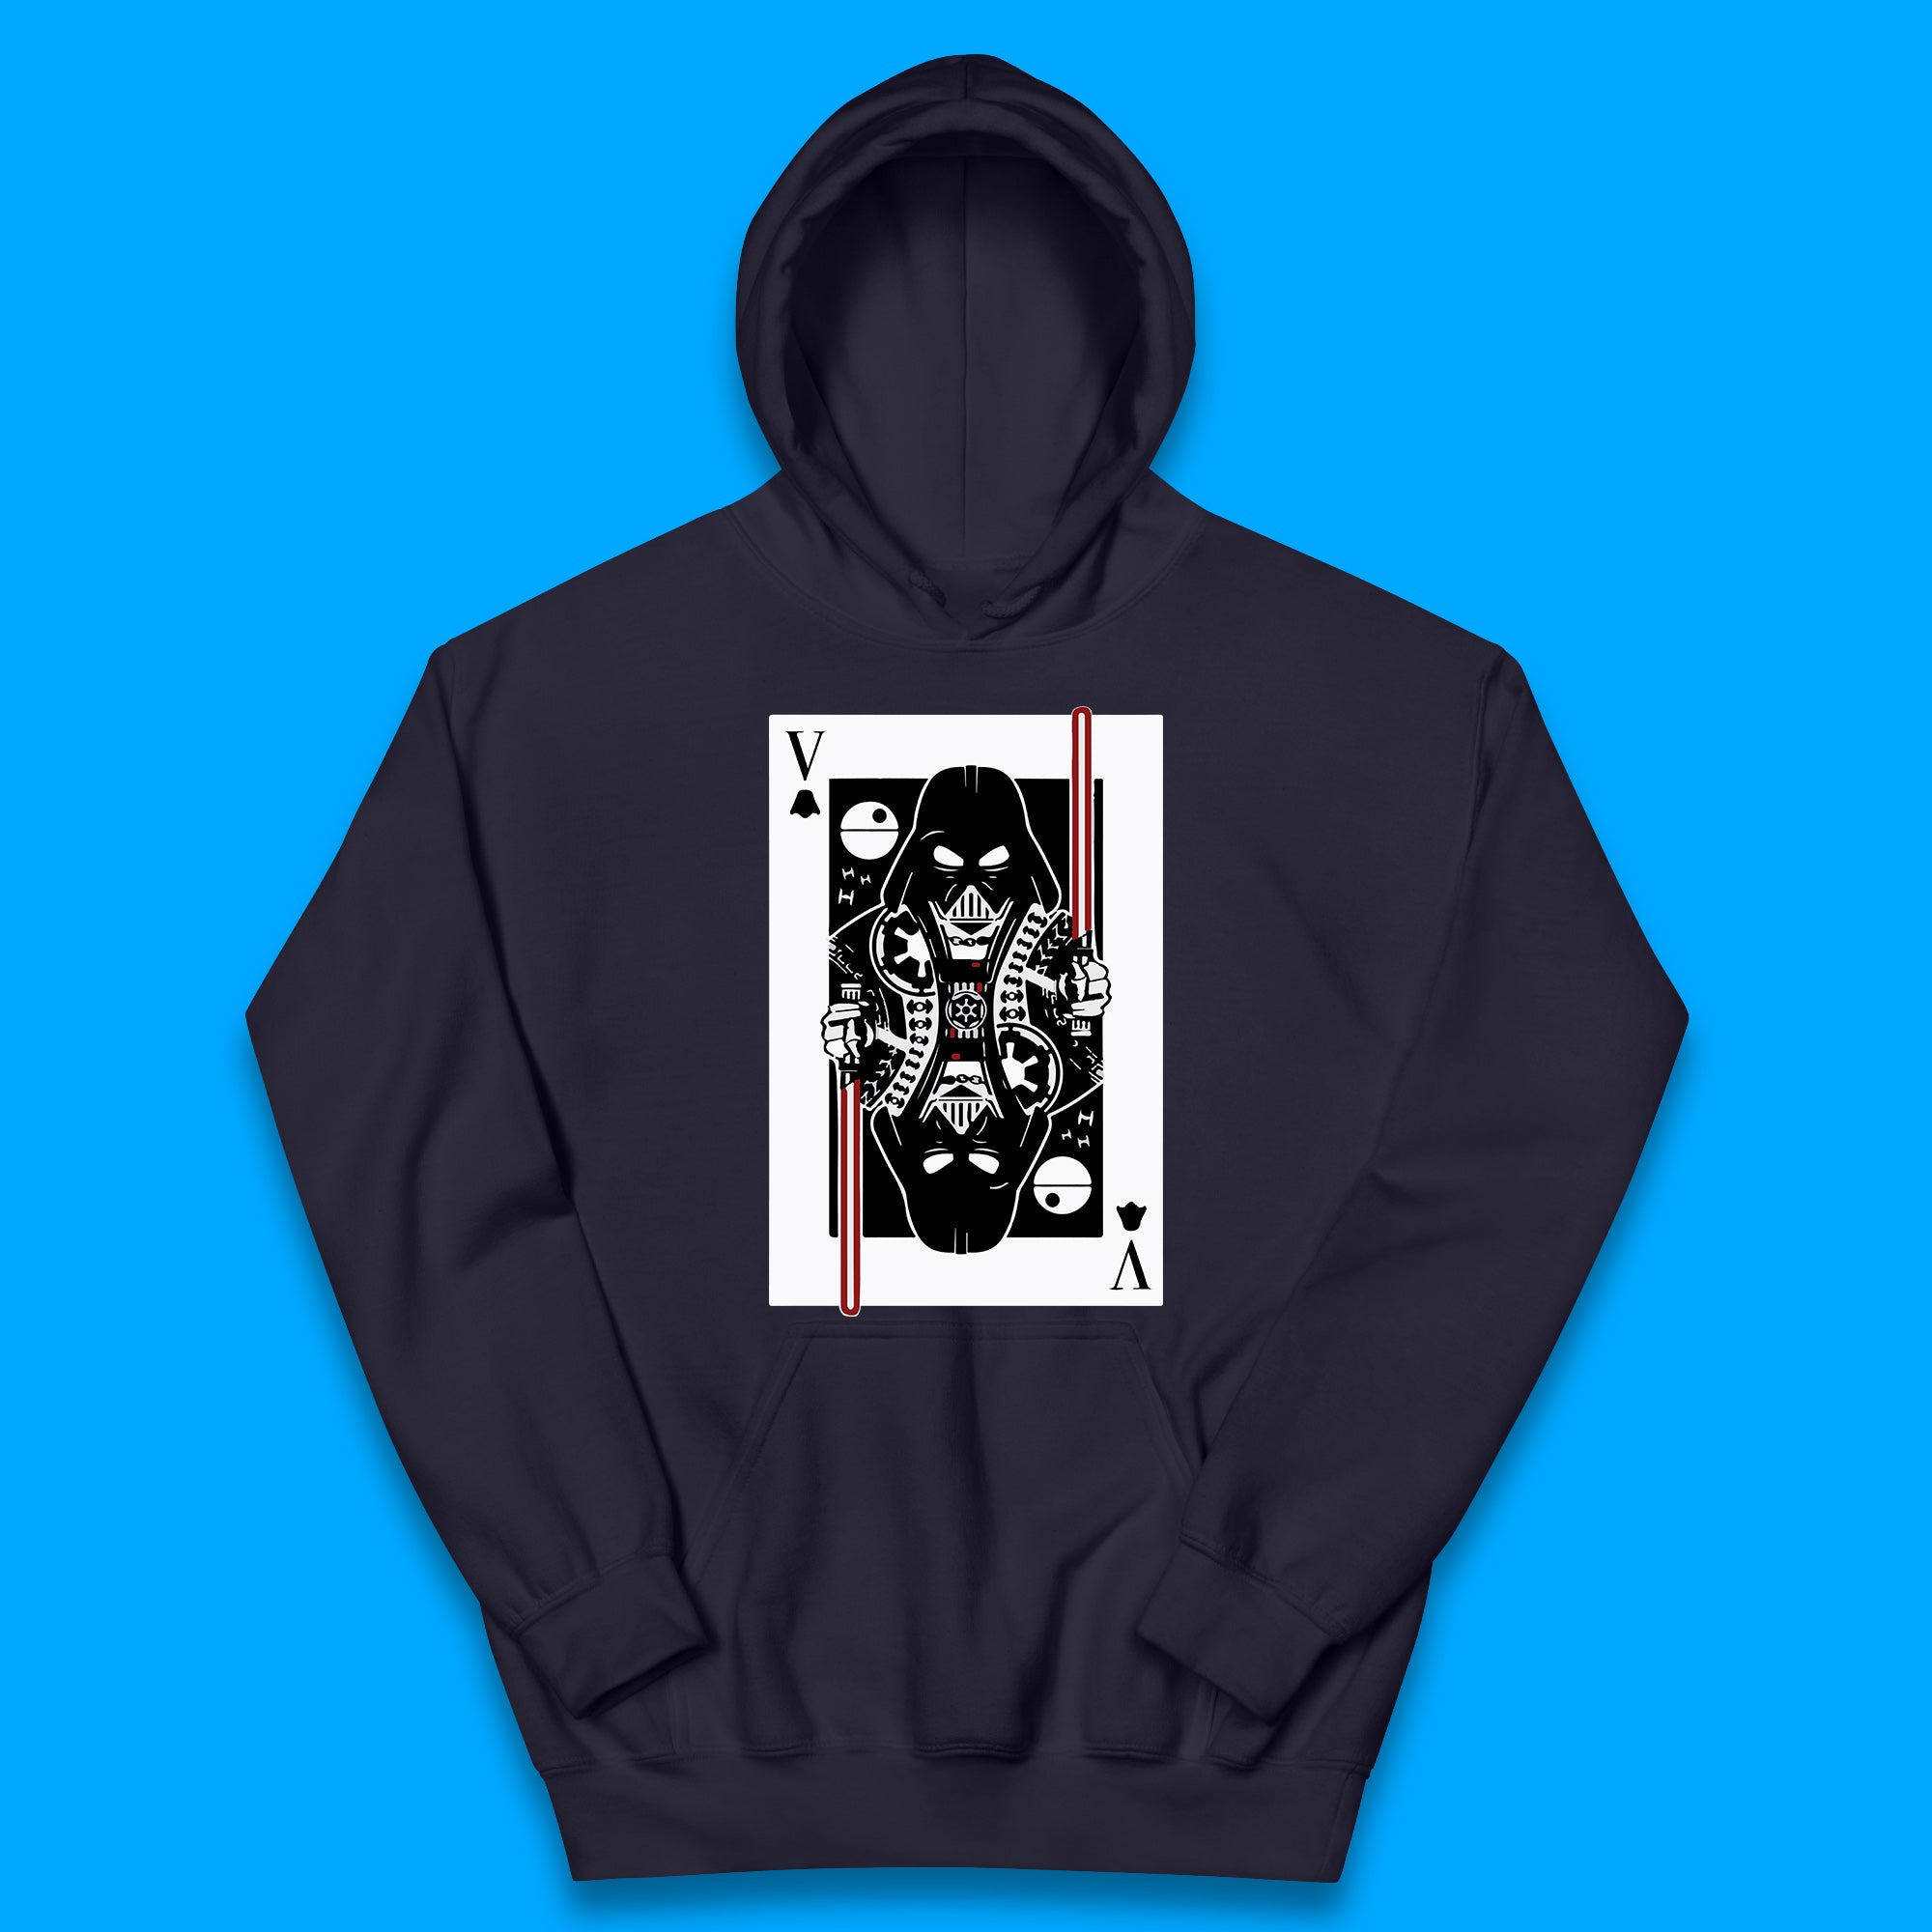 Star Wars Fictional Character Darth Vader Playing Card Vader King Card Sci-fi Action Adventure Movie 46th Anniversary Kids Hoodie